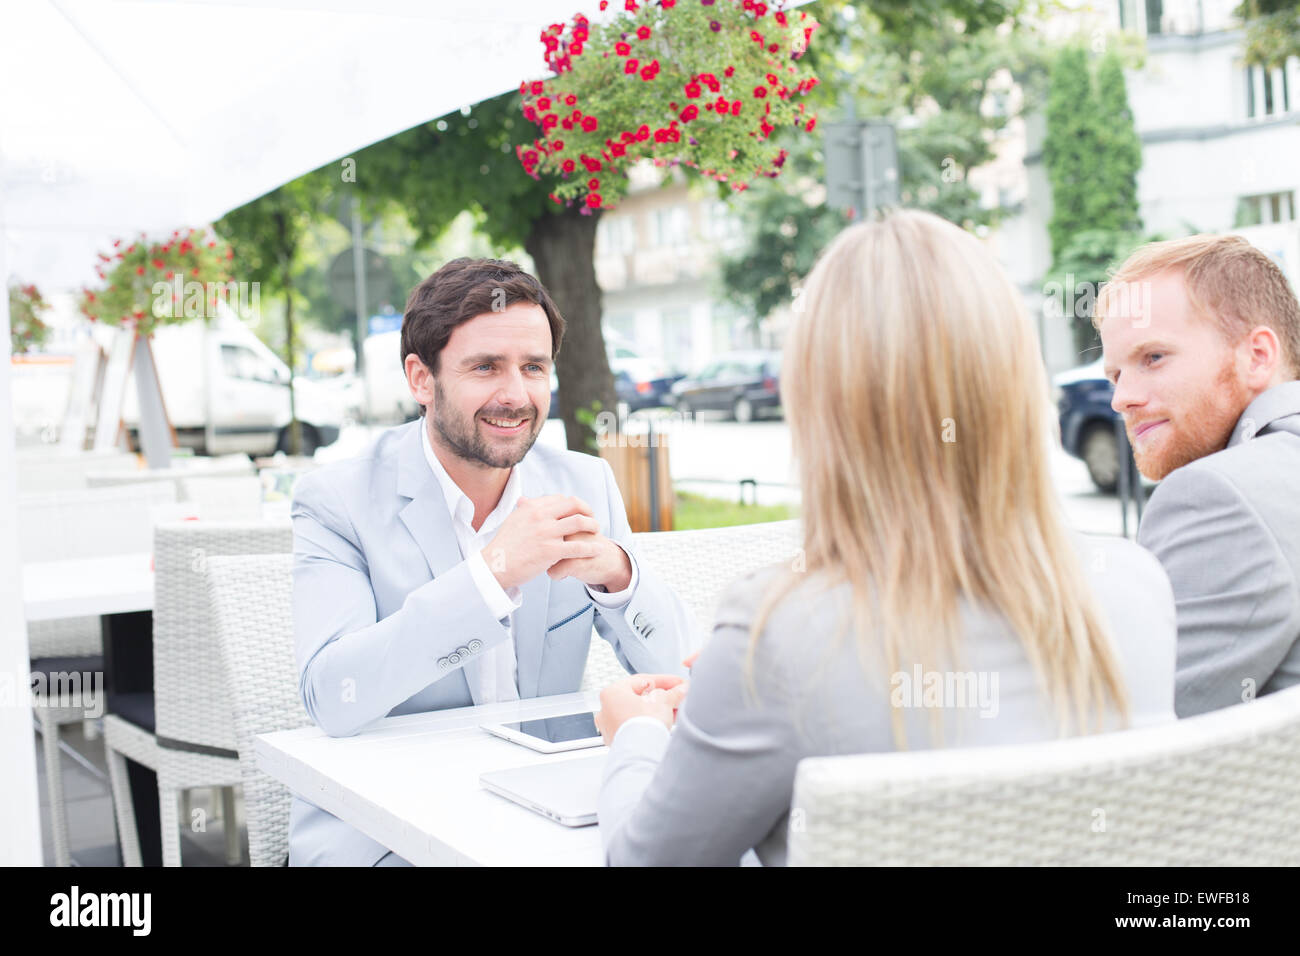 Happy businessman discussing with colleagues at sidewalk cafe Stock Photo